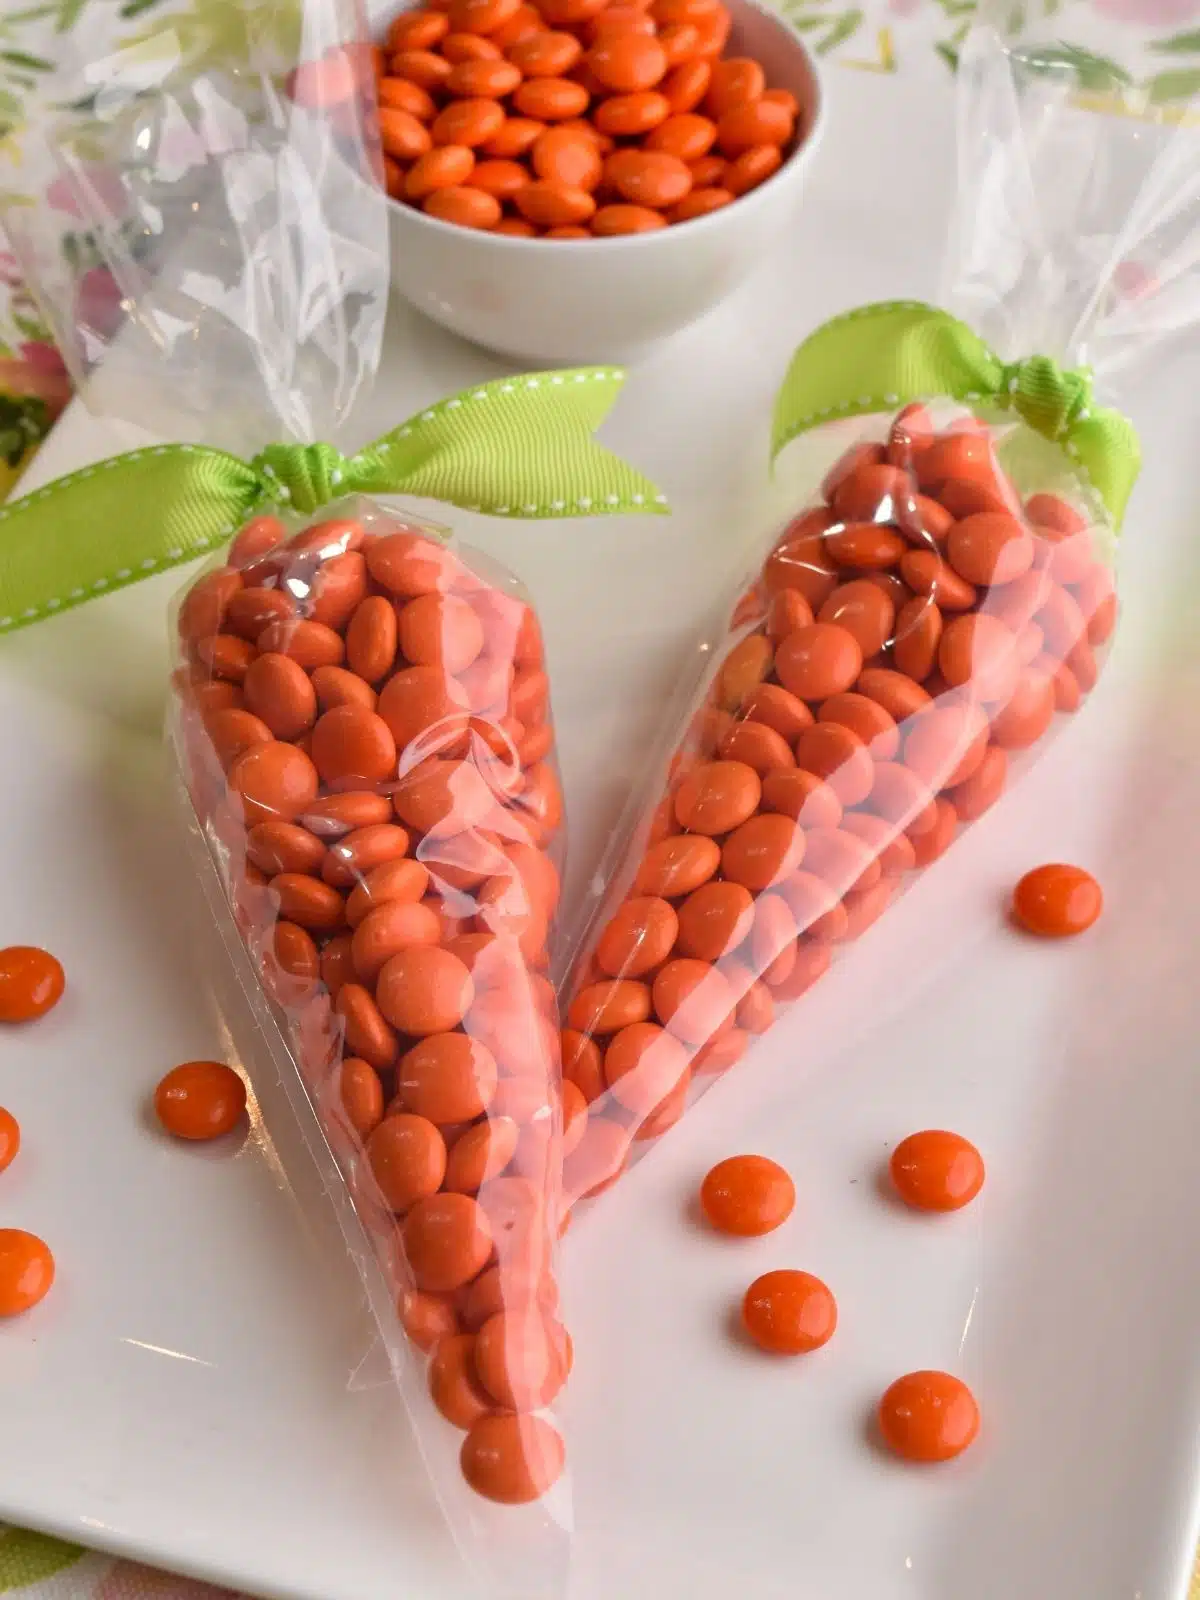 cellophane bags filled with orange candy pieces tied with green ribbon for Easter no bake treats.